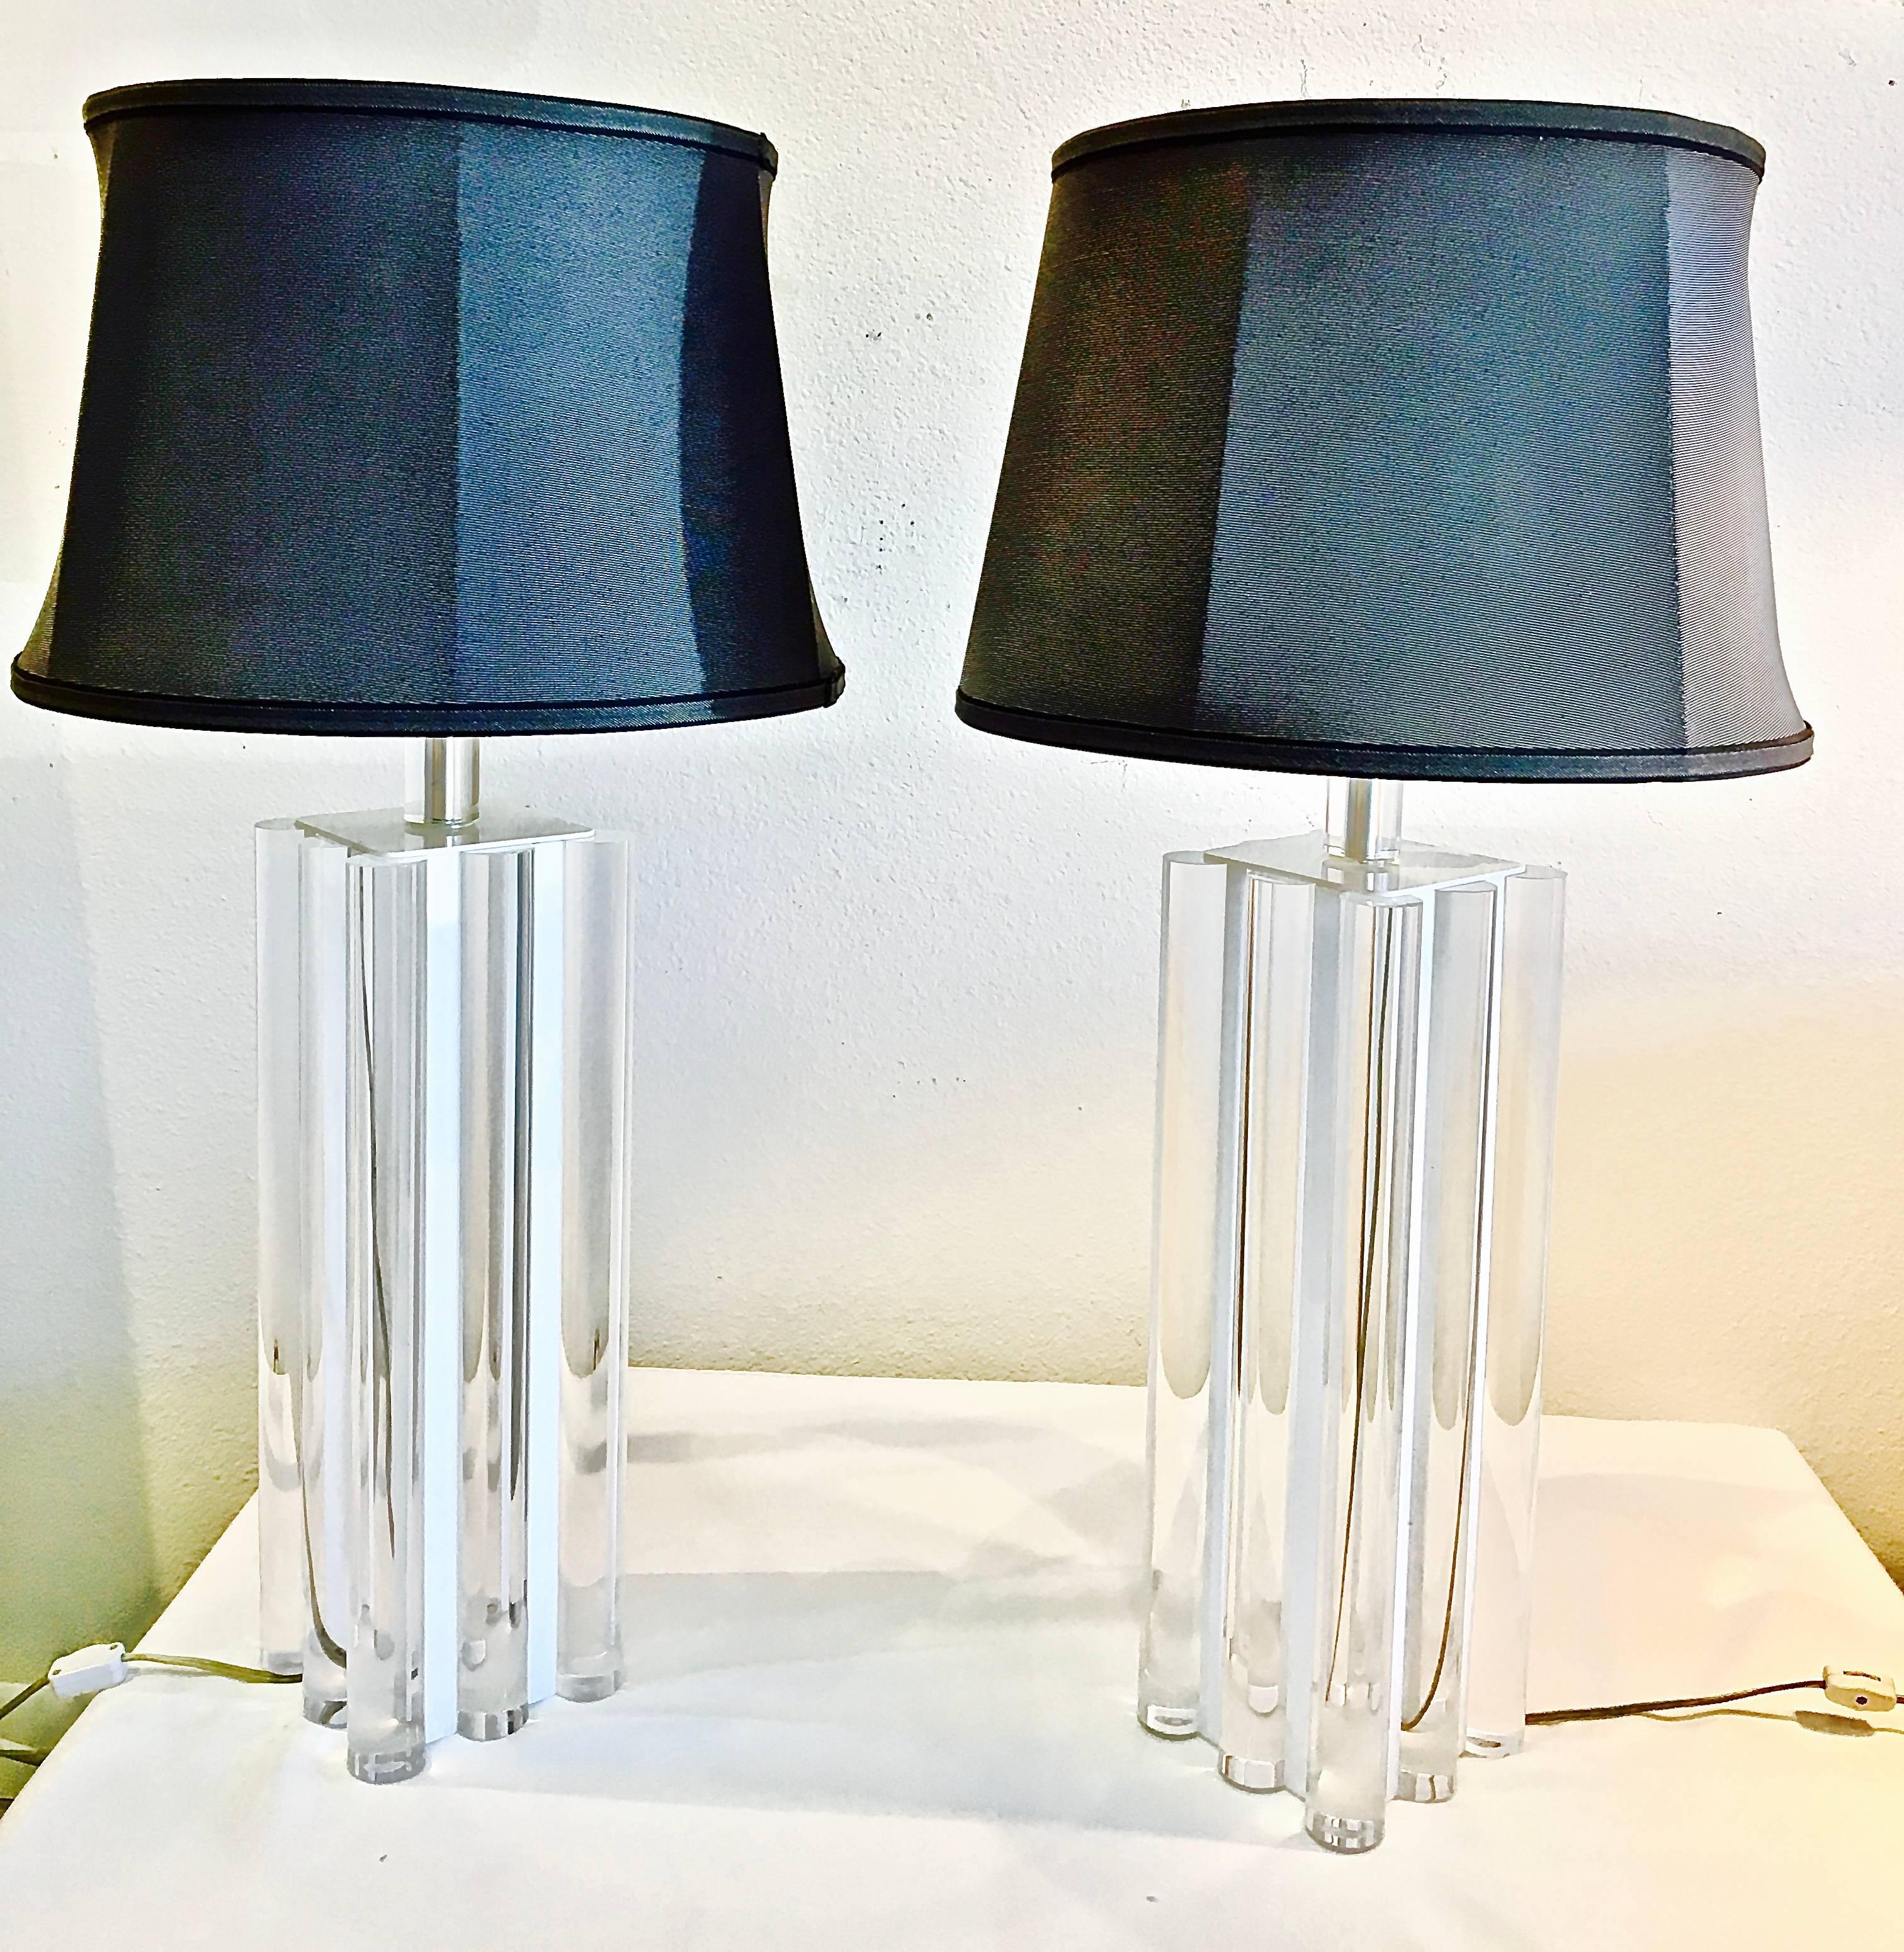 Exquisite pair of Charles Hollis Jones column lamps in clear Lucite with white Lucite accents, circa 1970s. Lamps have been vetted personally by Charles Hollis Jones as his design.